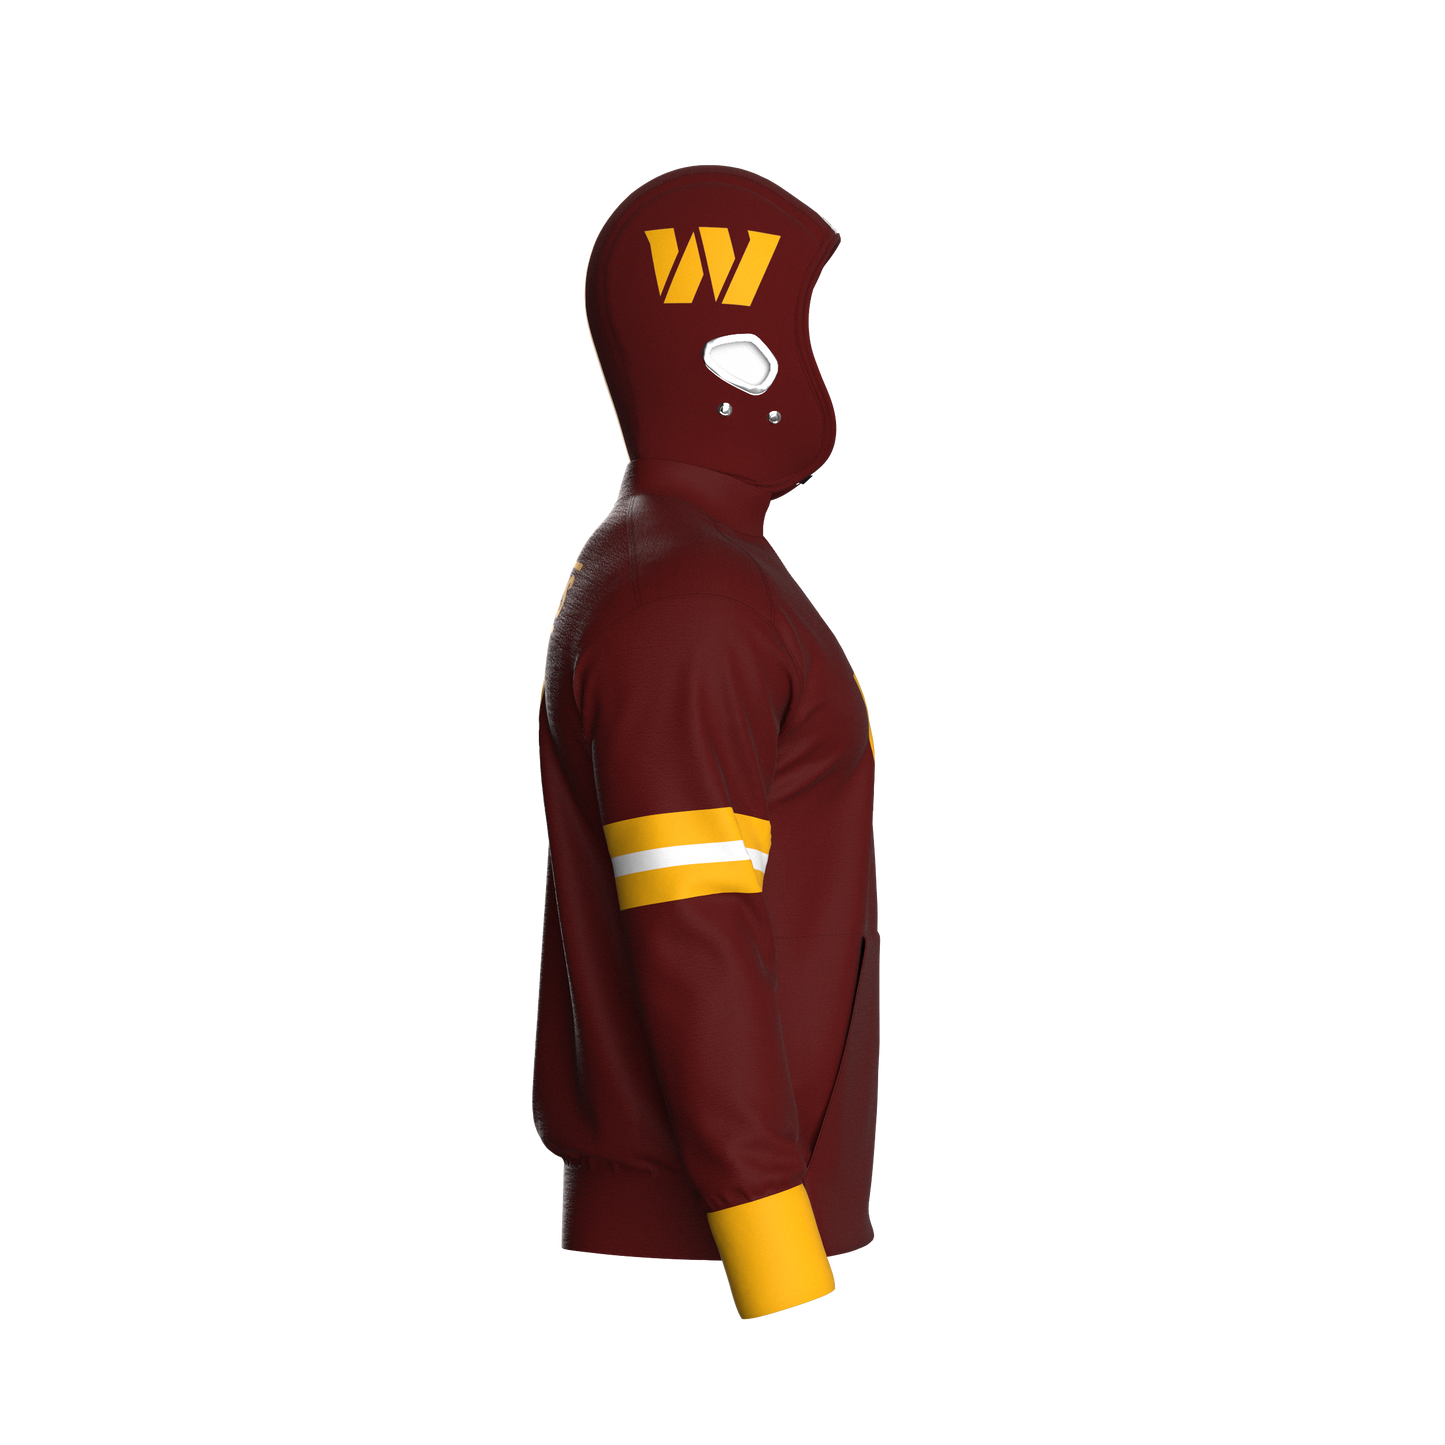 Washington Commanders Home Pullover (adult)